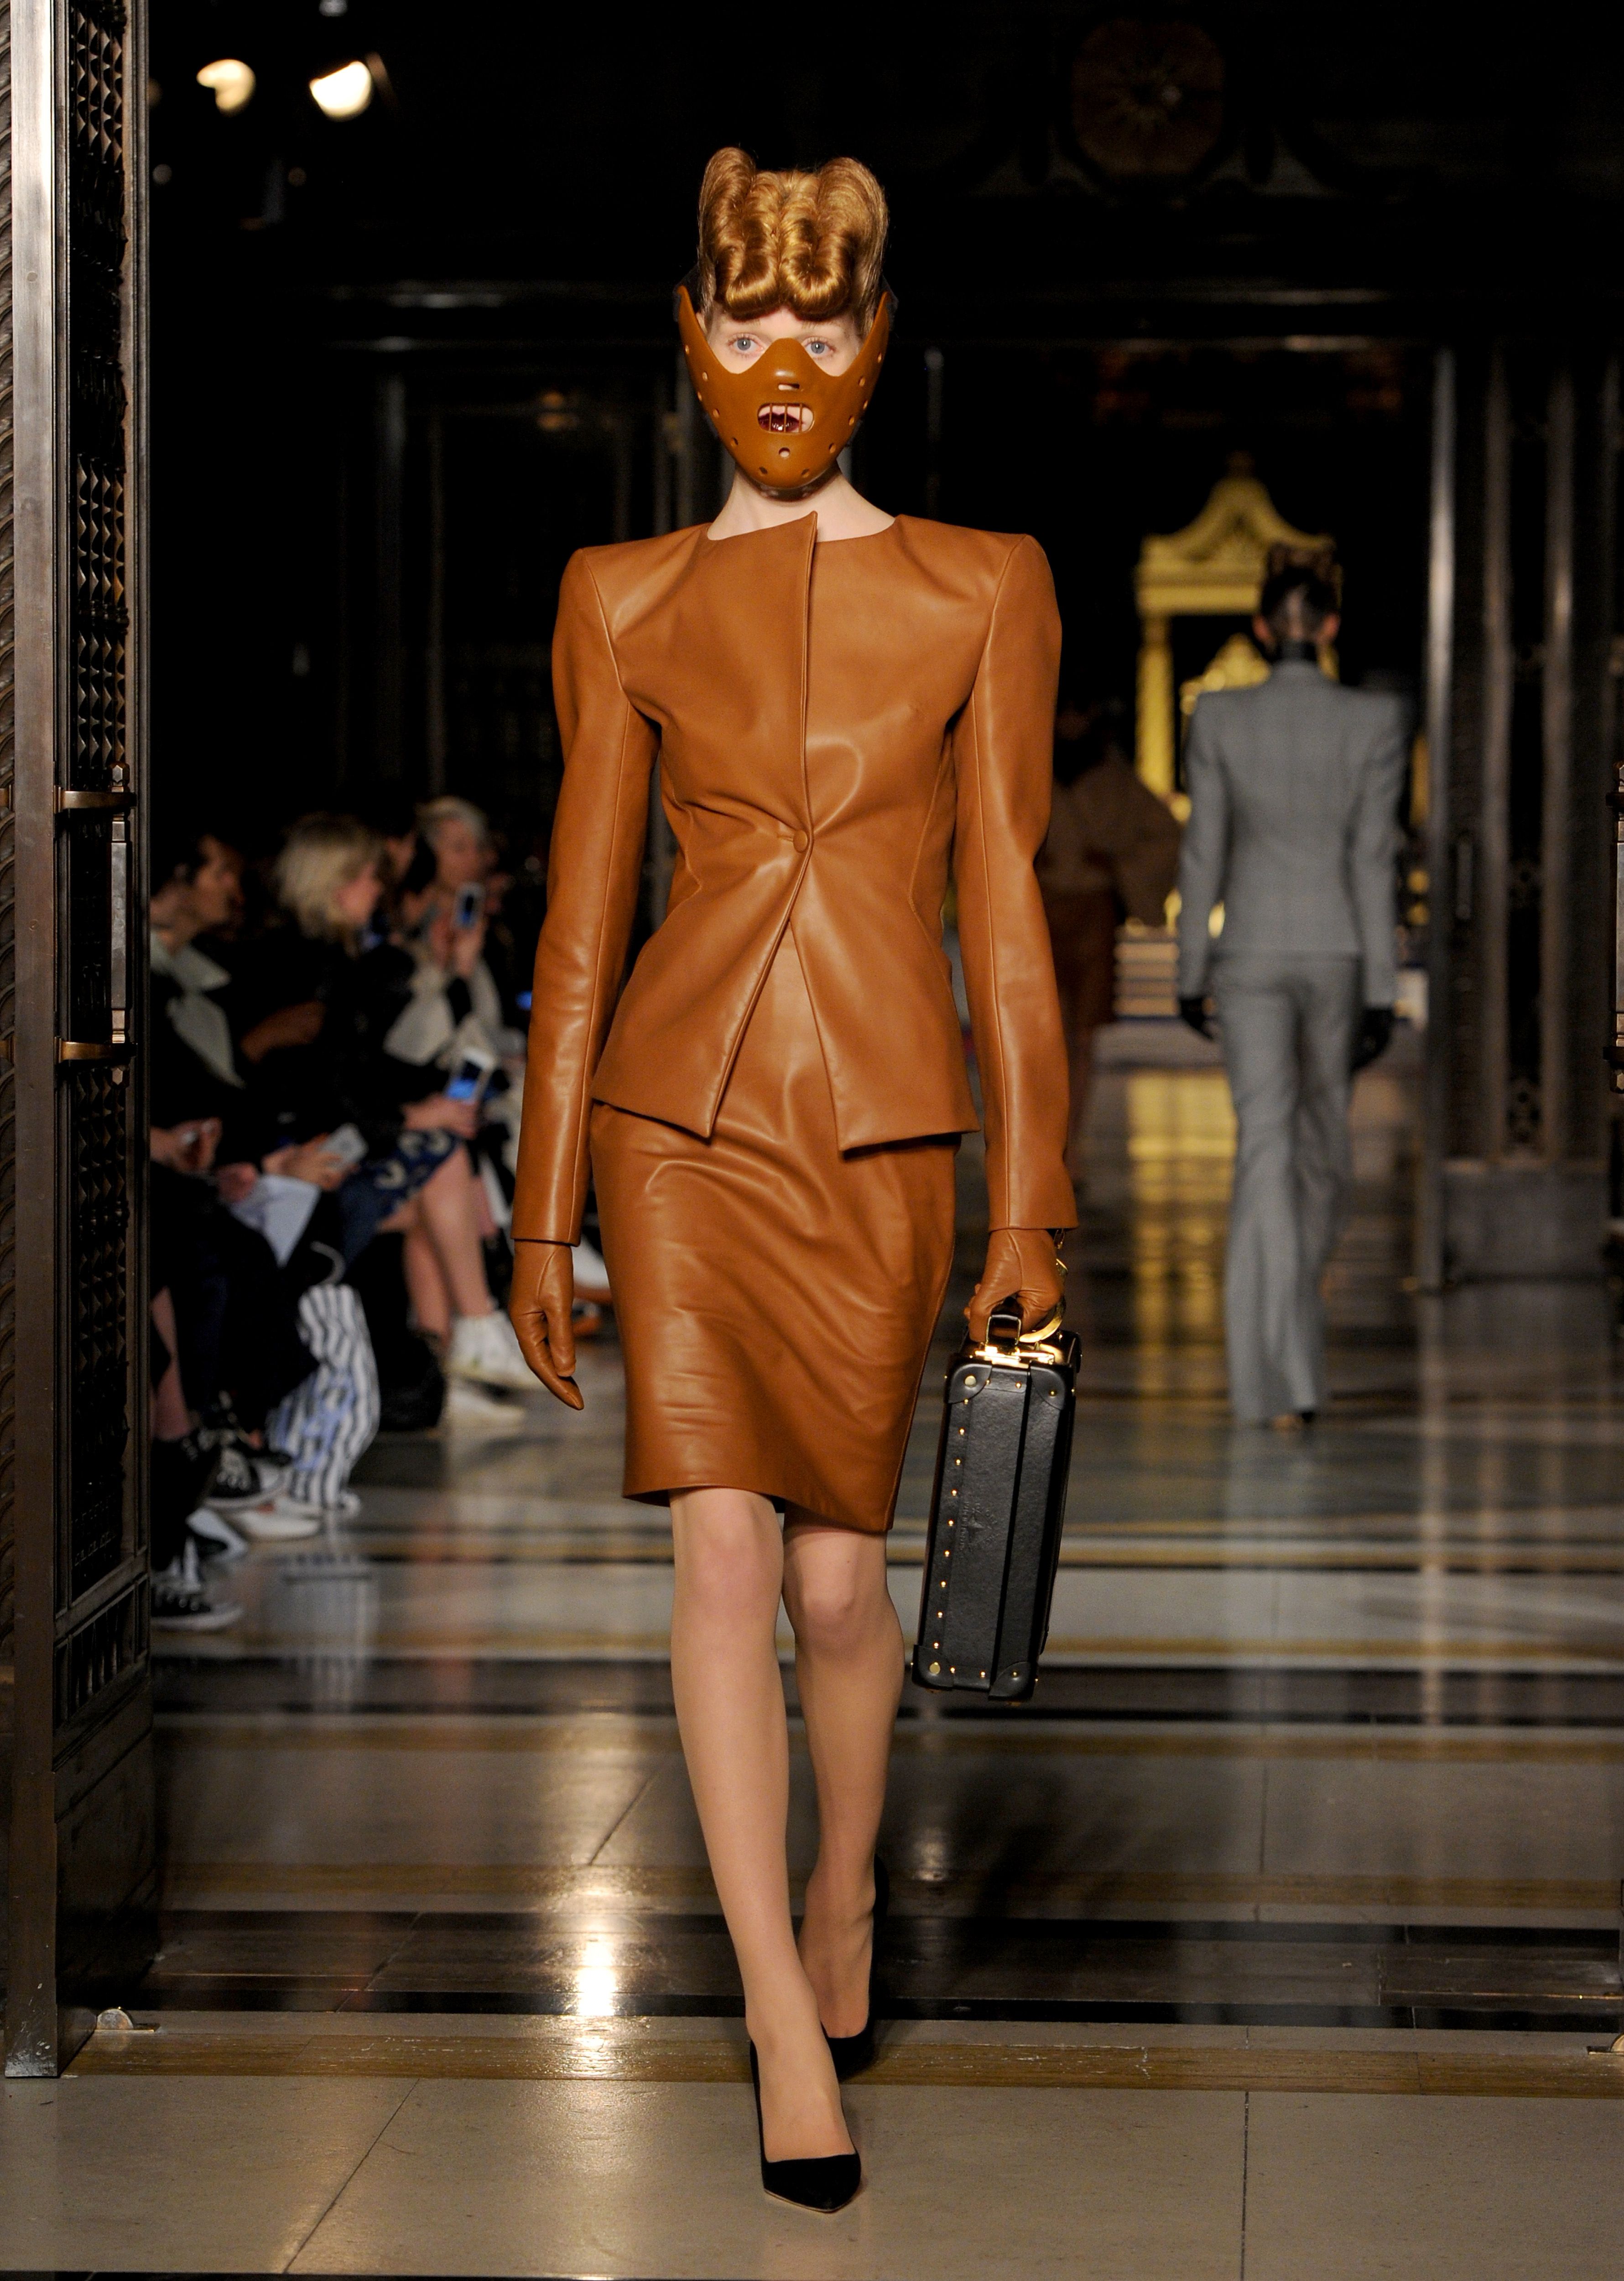 Halloween costumes: inspiration from the catwalks